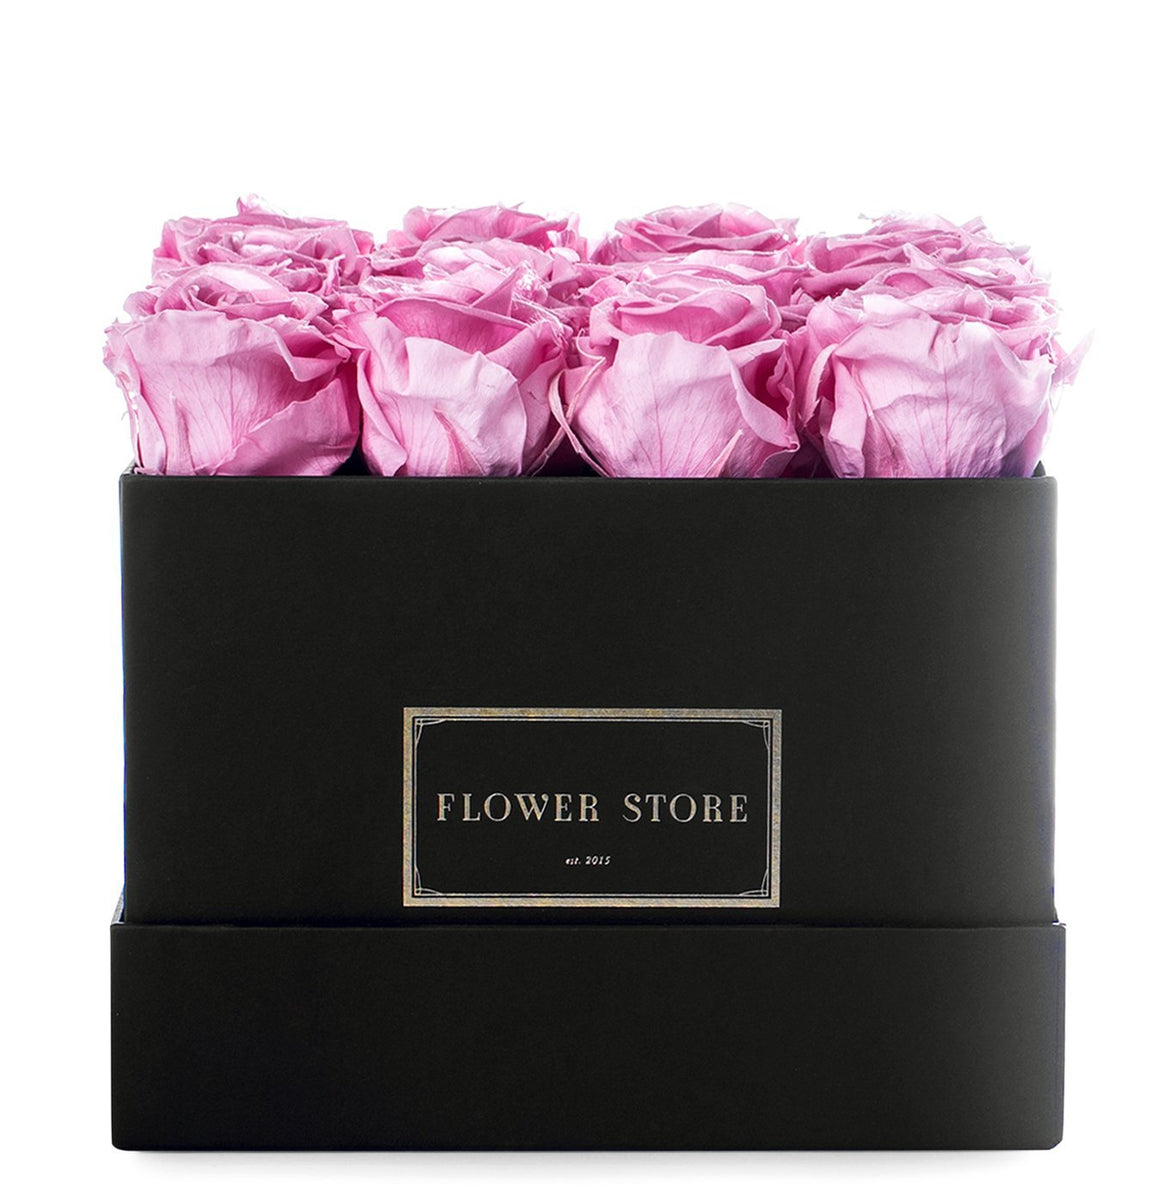 Square black box with pink roses - live flowers